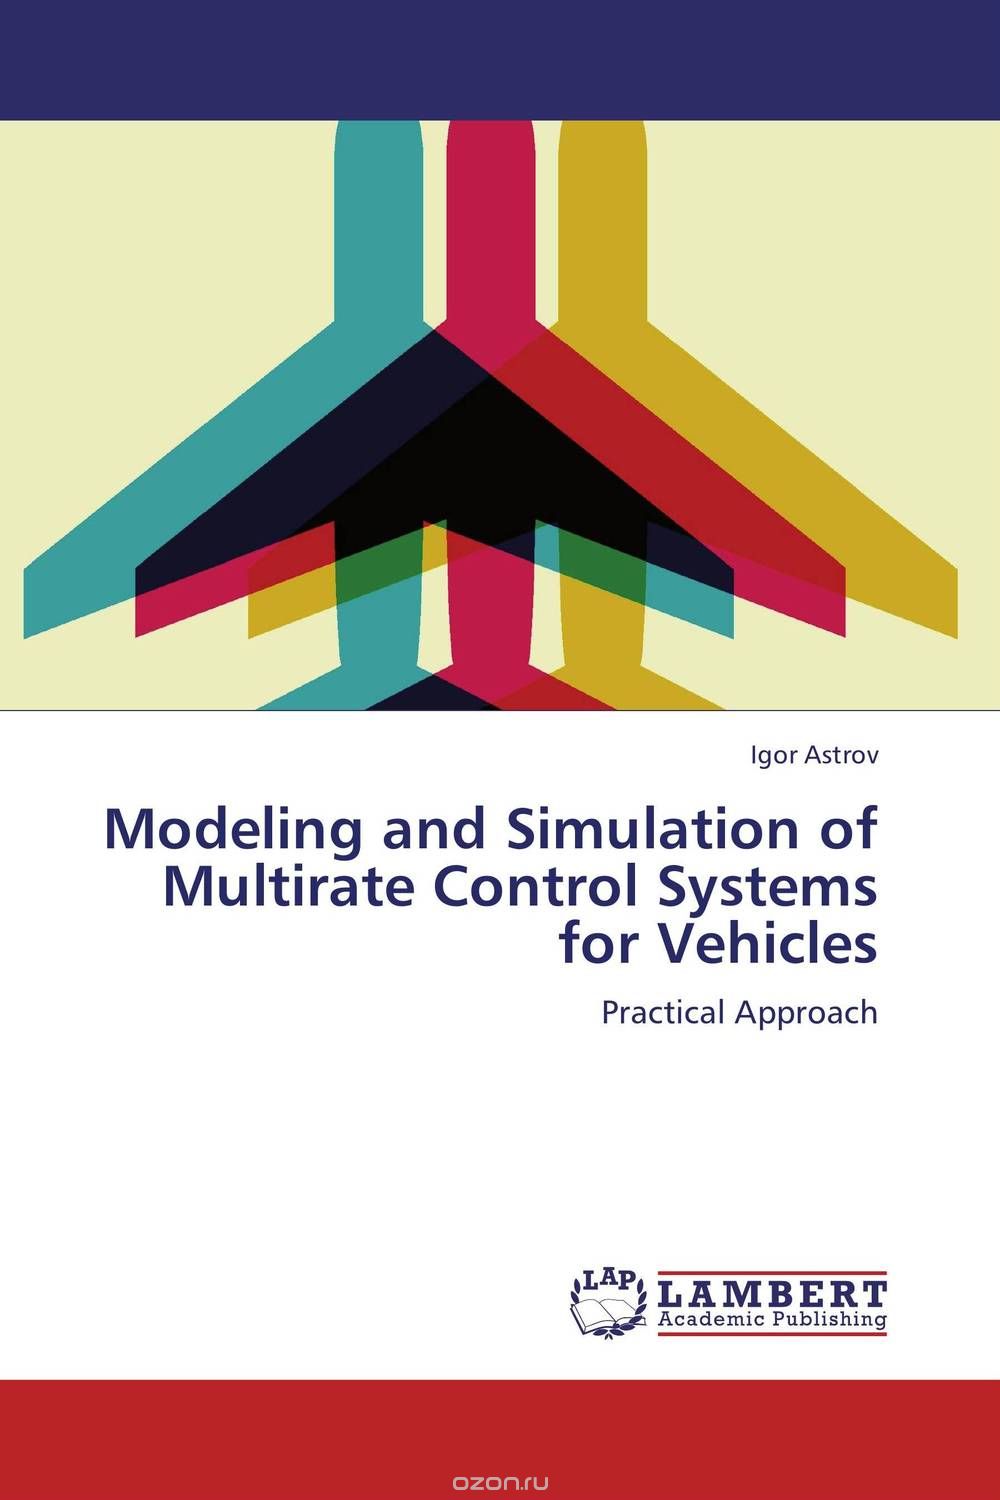 Скачать книгу "Modeling and Simulation of Multirate Control Systems for Vehicles"